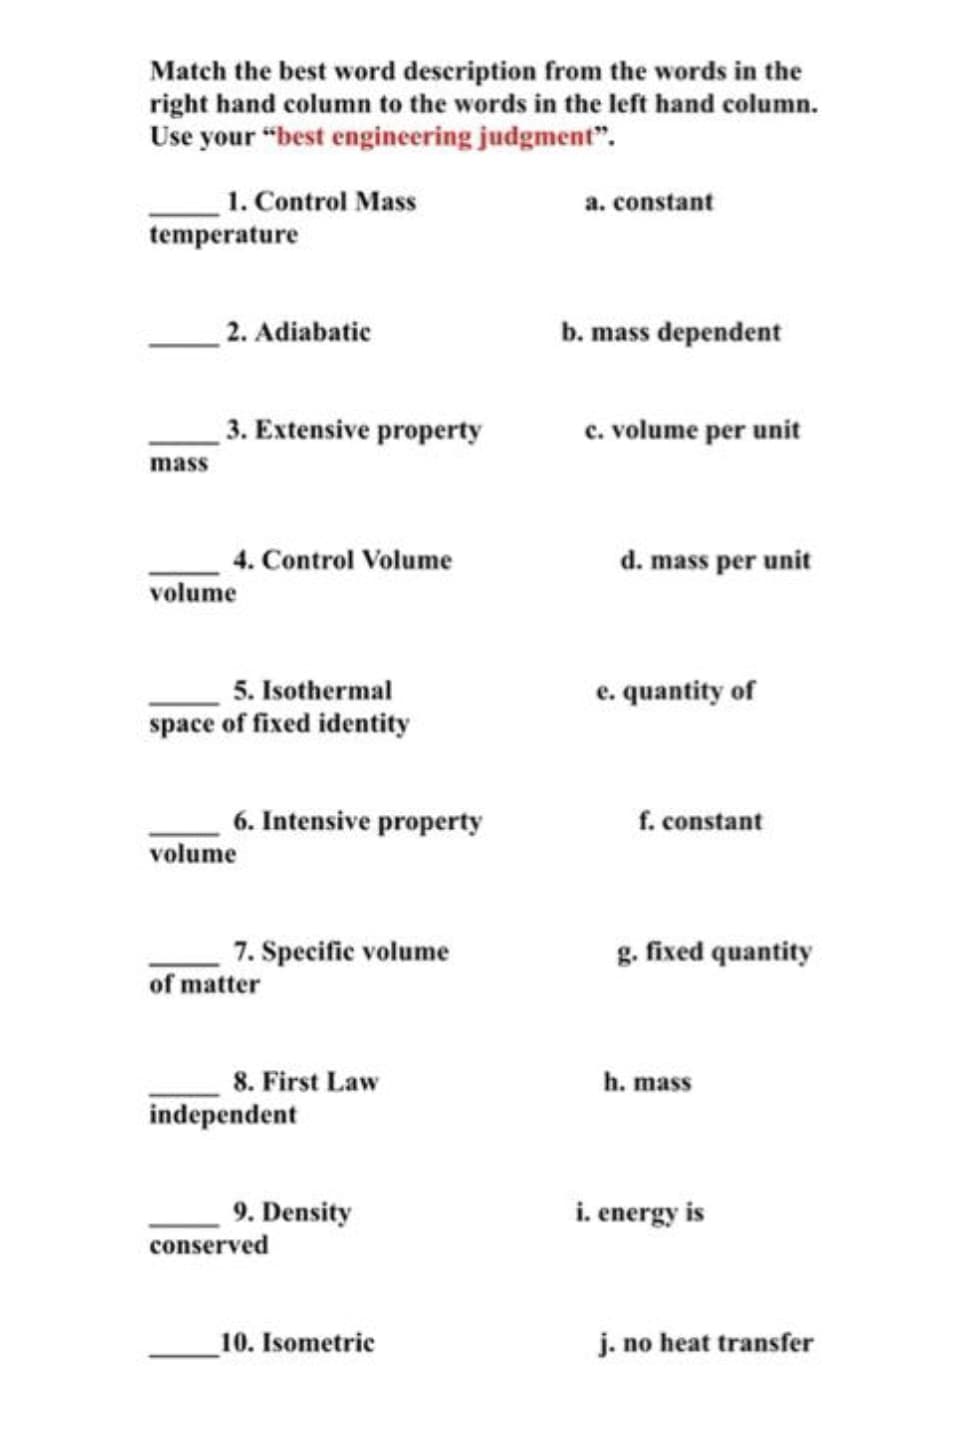 Match the best word description from the words in the
right hand column to the words in the left hand column.
Use your "best engineering judgment".
1. Control Mass
temperature
a. constant
2. Adiabatic
b. mass dependent
3. Extensive property
c. volume per unit
mass
d. mass per unit
4. Control Volume
volume
5. Isothermal
space of fixed identity
e. quantity of
6. Intensive property
f. constant
volume
7. Specific volume
g. fixed quantity
of matter
8. First Law
independent
h. mass
9. Density
conserved
i. energy is
10. Isometric
j. no heat transfer
